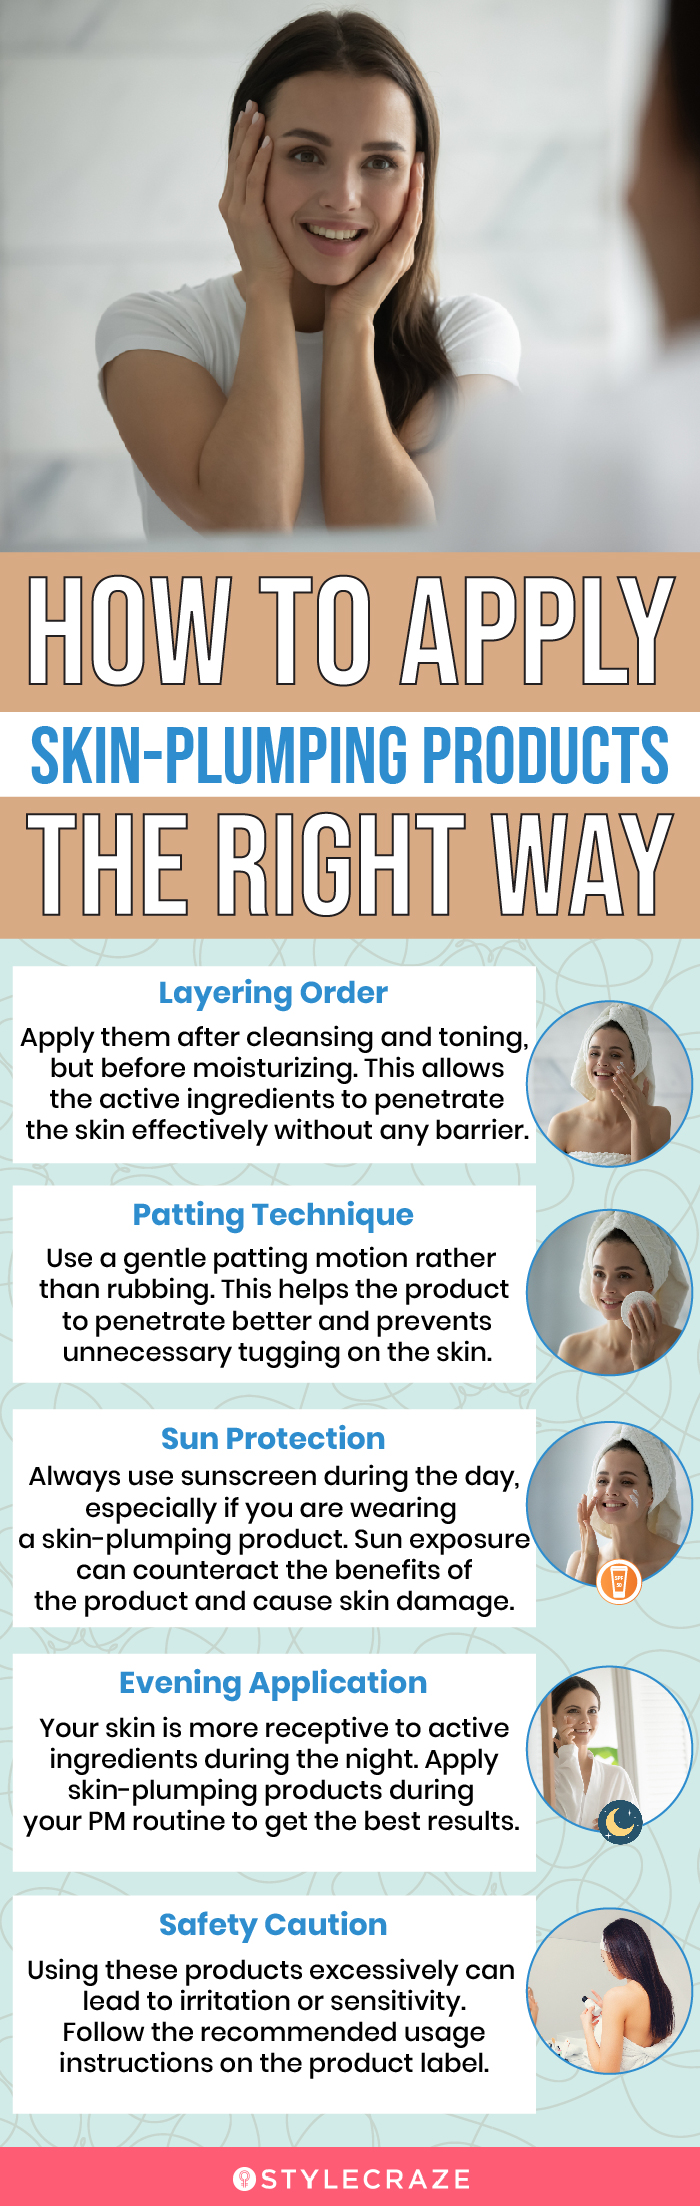  How To Apply Skin-Plumping Products The Right Way (infographic)